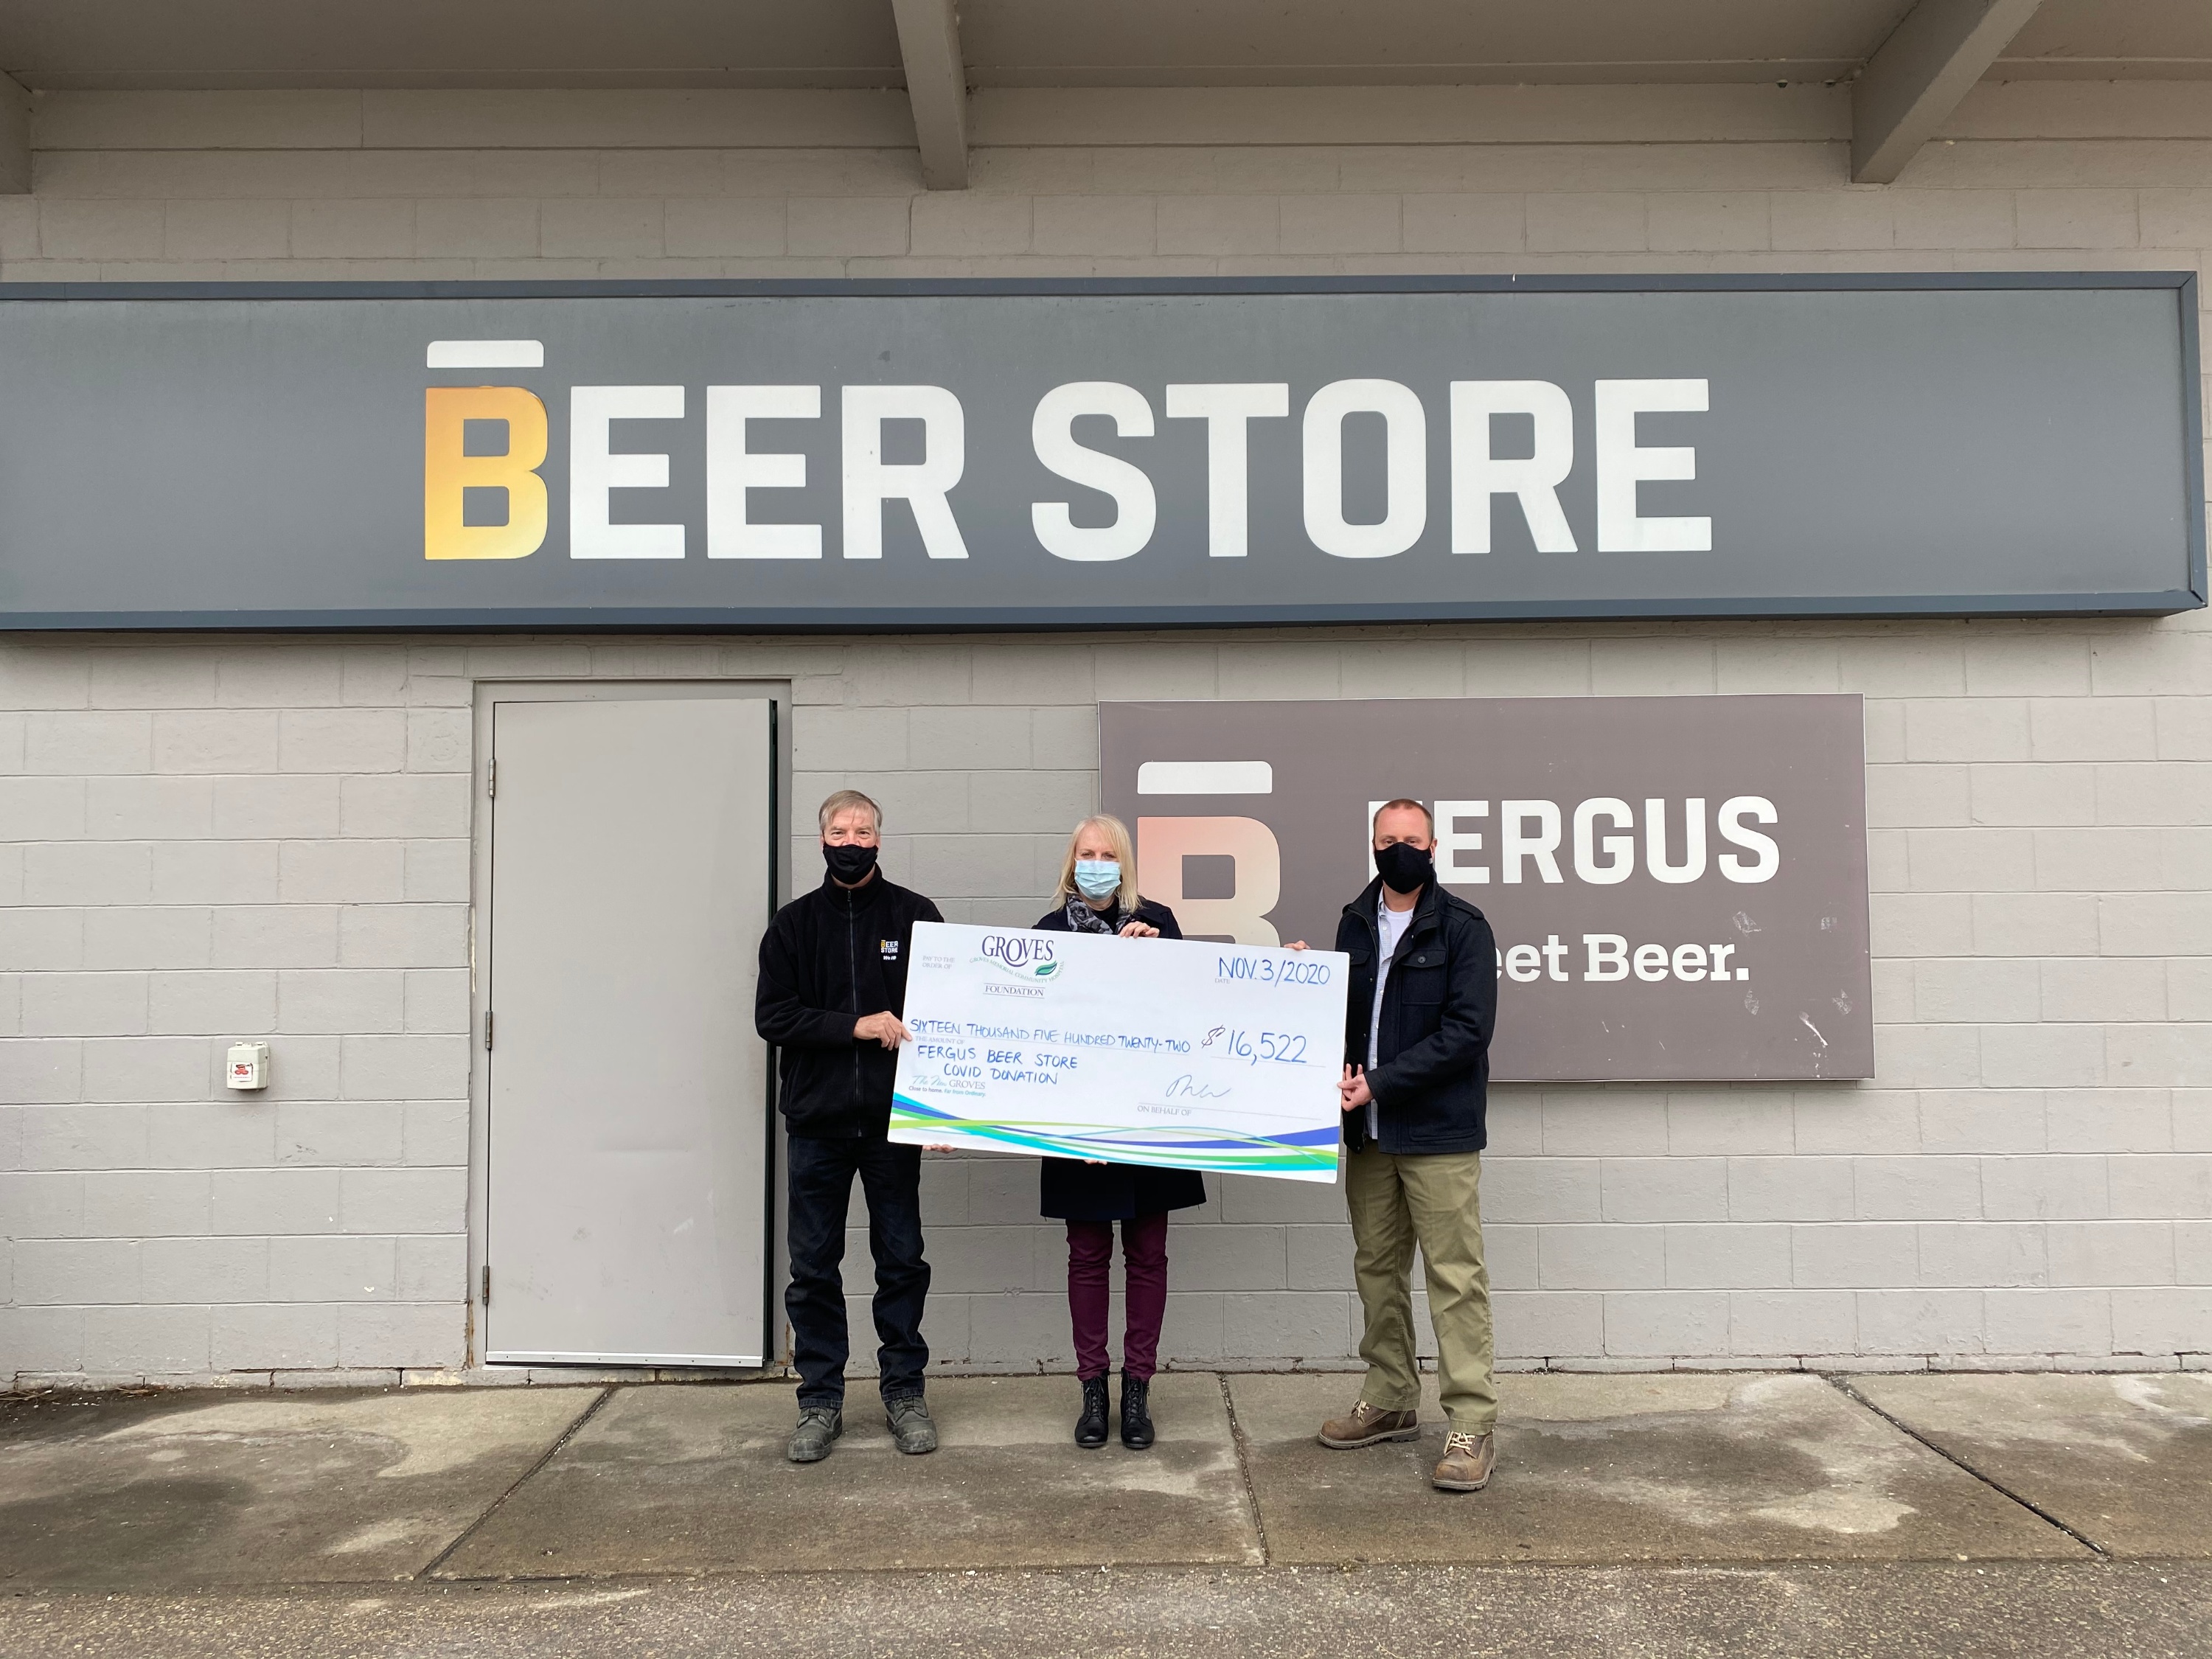 We are so grateful to share that the Fergus Beer Store & Elora Beer Store collectively raised over $16,500 for Groves' COVID Relief Fund! Funds were raised through empty bottle returns along with donations from customers. This charitable initiative ran for only 4 months from June to September - WOW!  Thank you to both teams and customers at the Fergus & Elora location for being so giving. We are so proud to be part of this community!